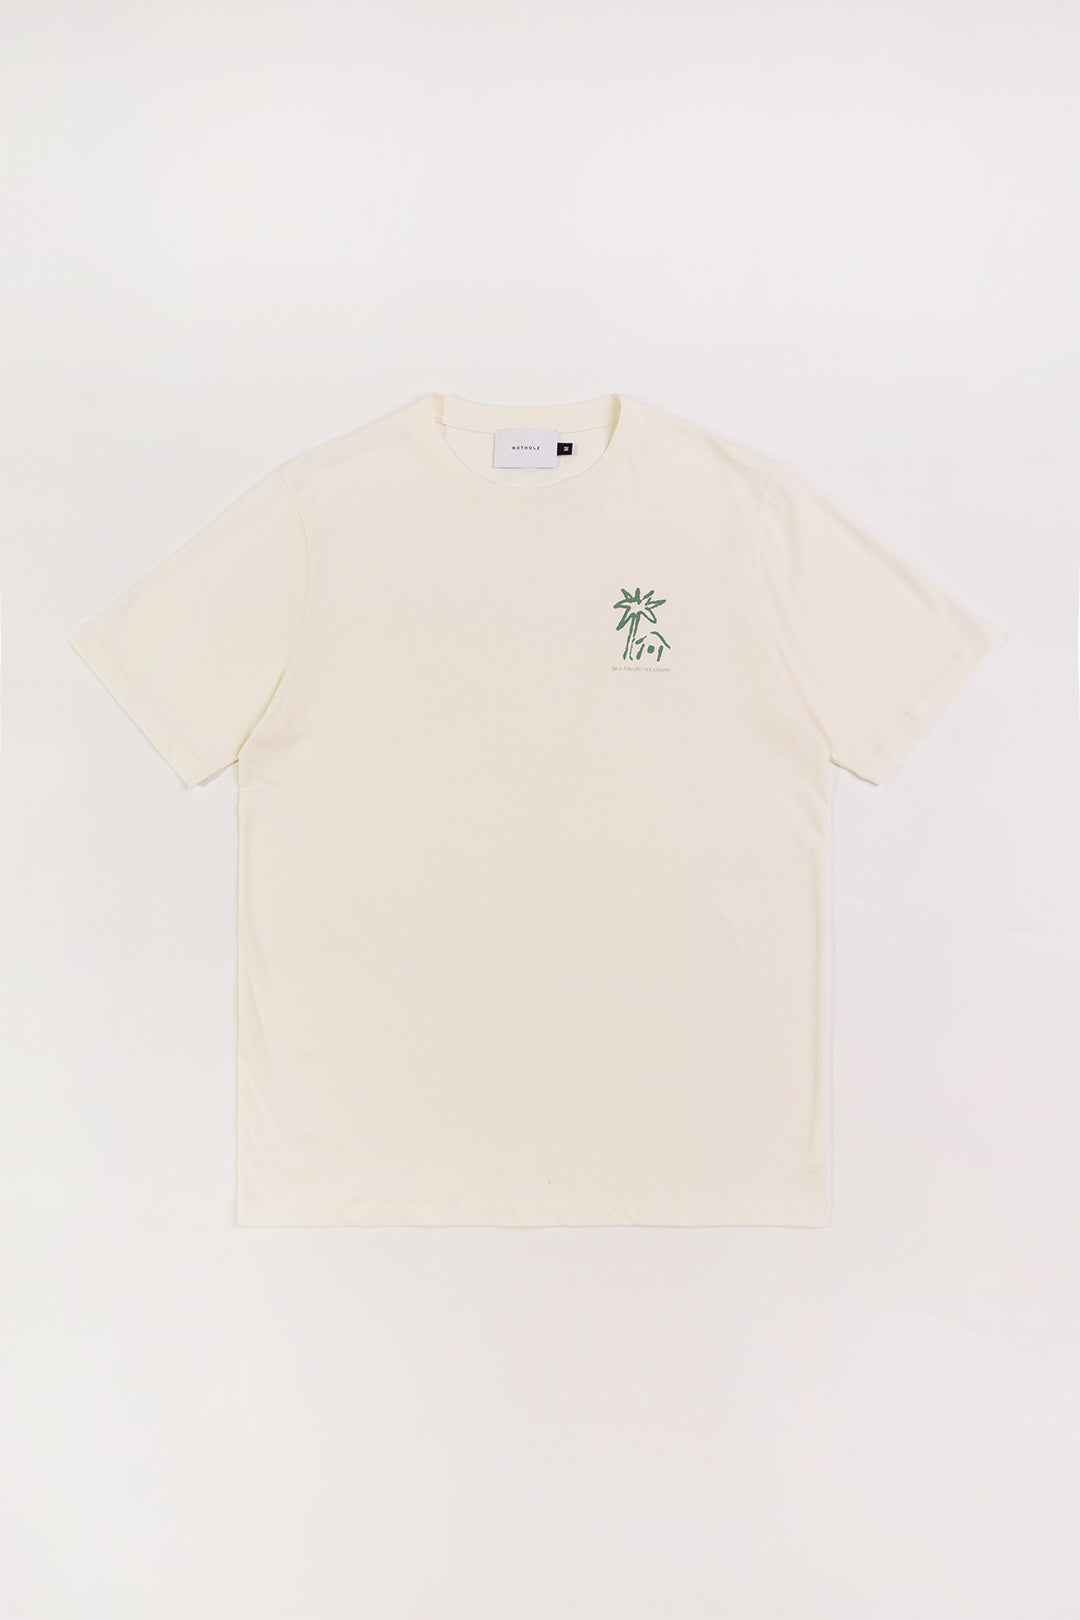 White Beachside T-shirt made from 100% organic cotton from Rotholz